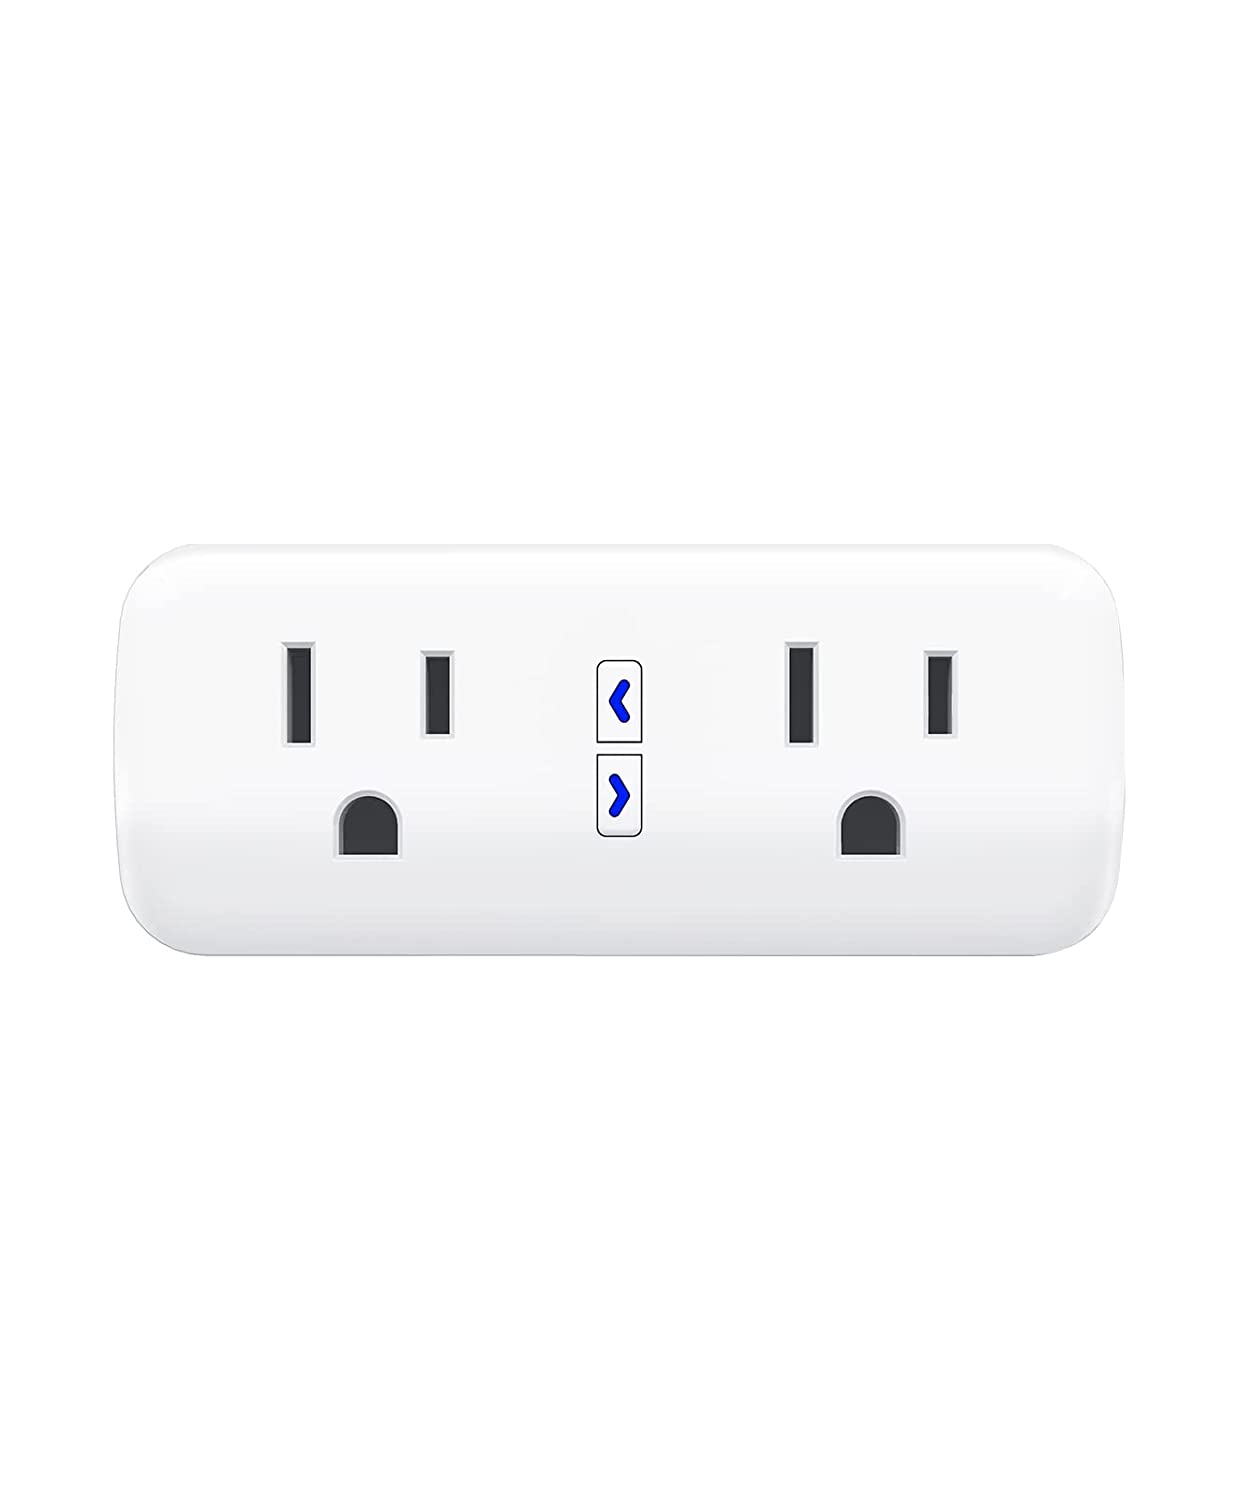 GHome Smart Mini Plug, Wi-Fi Outlet Extender Surge Protector Dual Smart Socket Compatible with Alexa or Google Home, Independently Or Together Control, FCC Listed (2 Pack), White